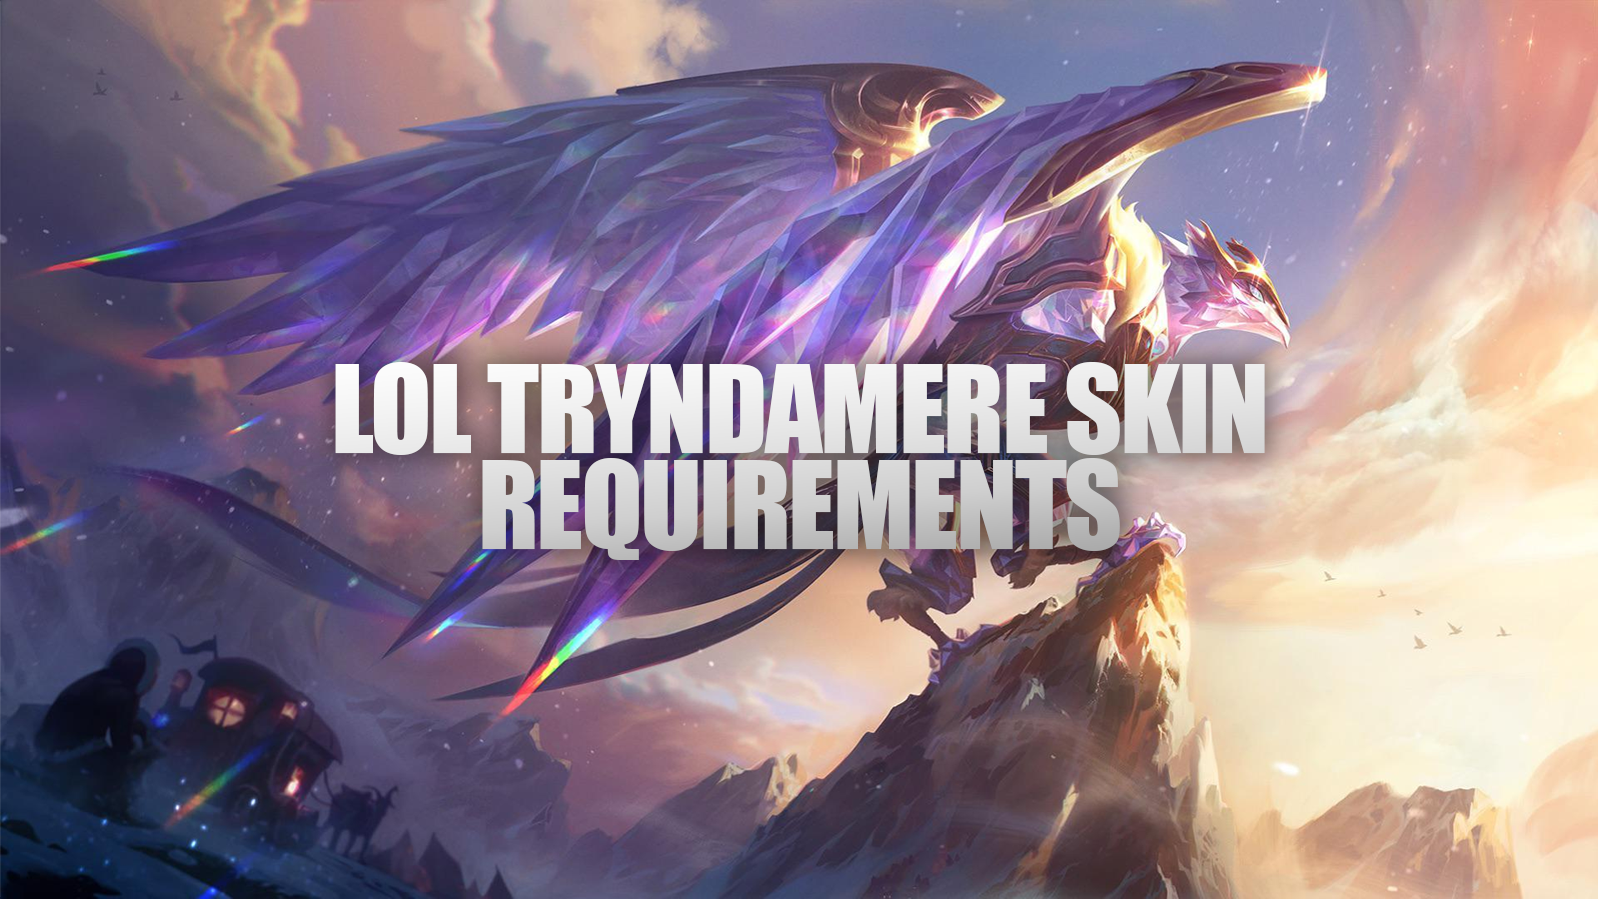 To get the LoL Tryndamere skin, League of Legends players need to meet the skin requirements. There are a few key requirements to meet to qualify for this LoL Season reward.